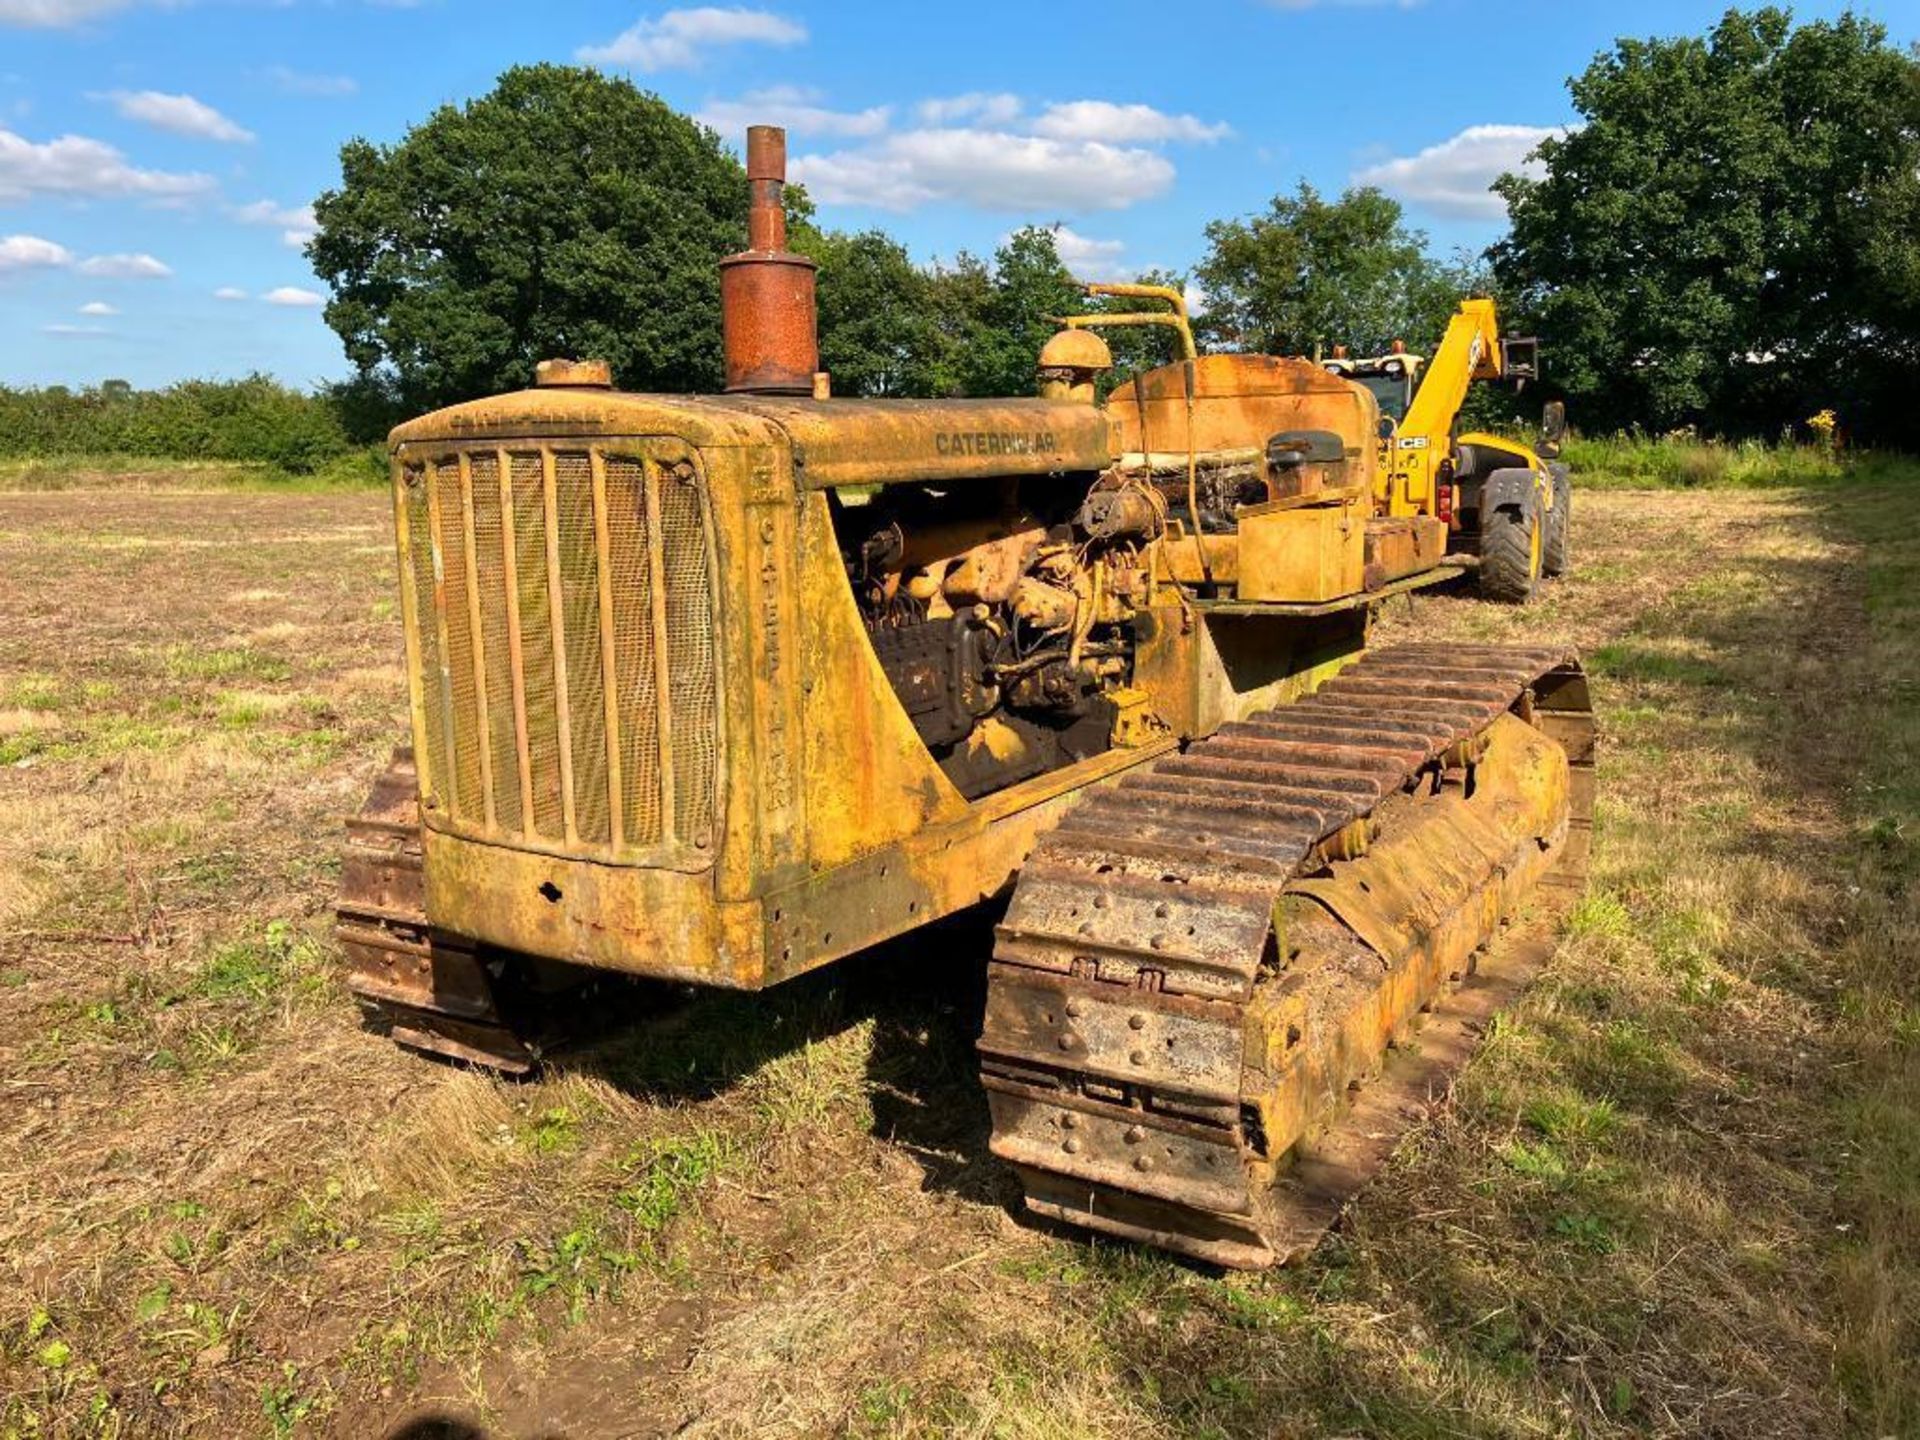 Caterpillar D6 metal tracked crawler with 20" tracks,swinging drawbar and rear winch - Image 9 of 12